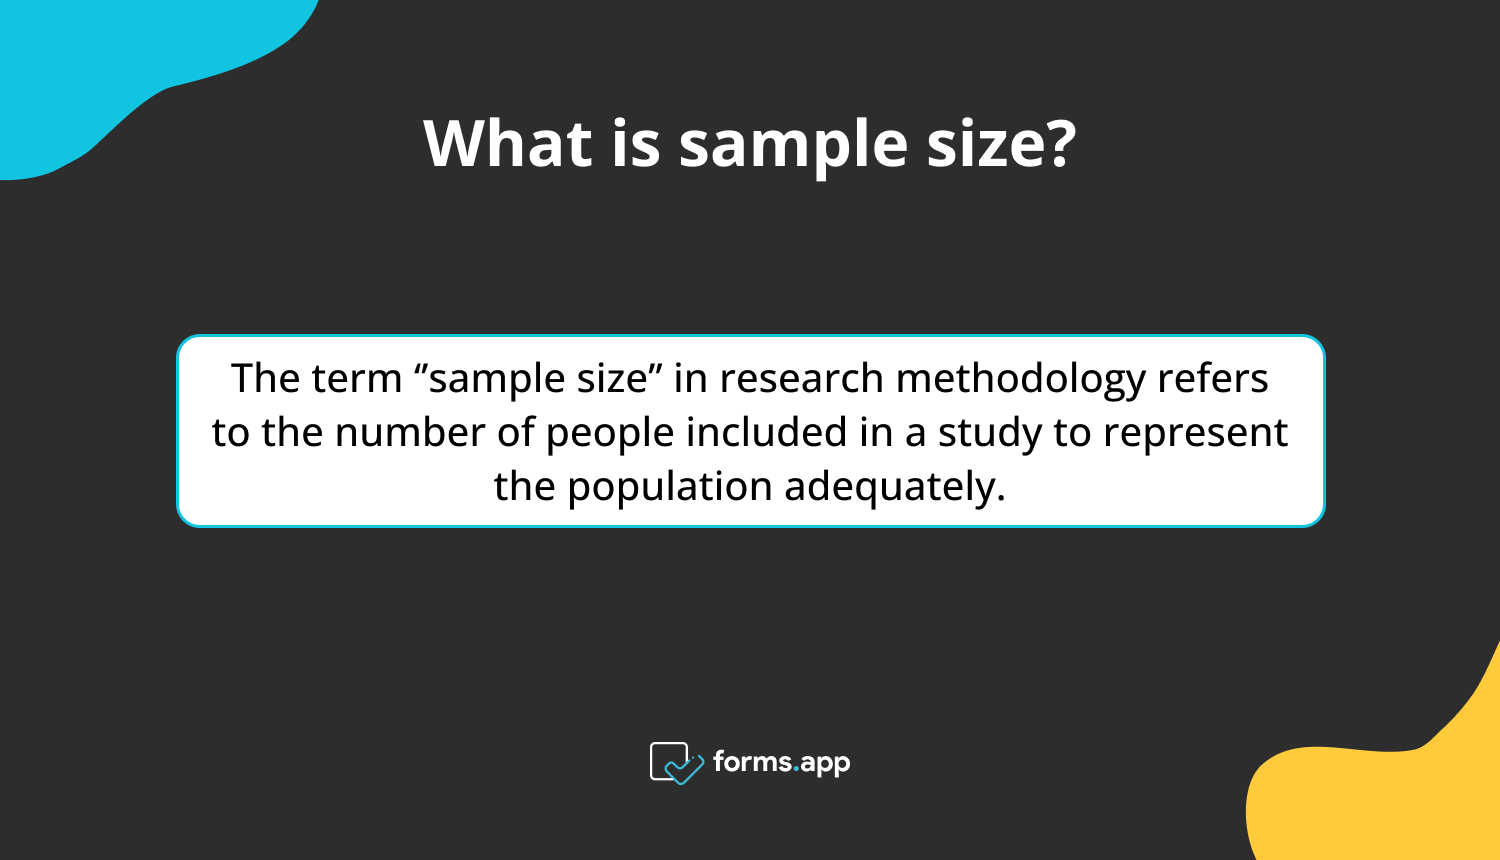 How to find the correct sample size for your research survey